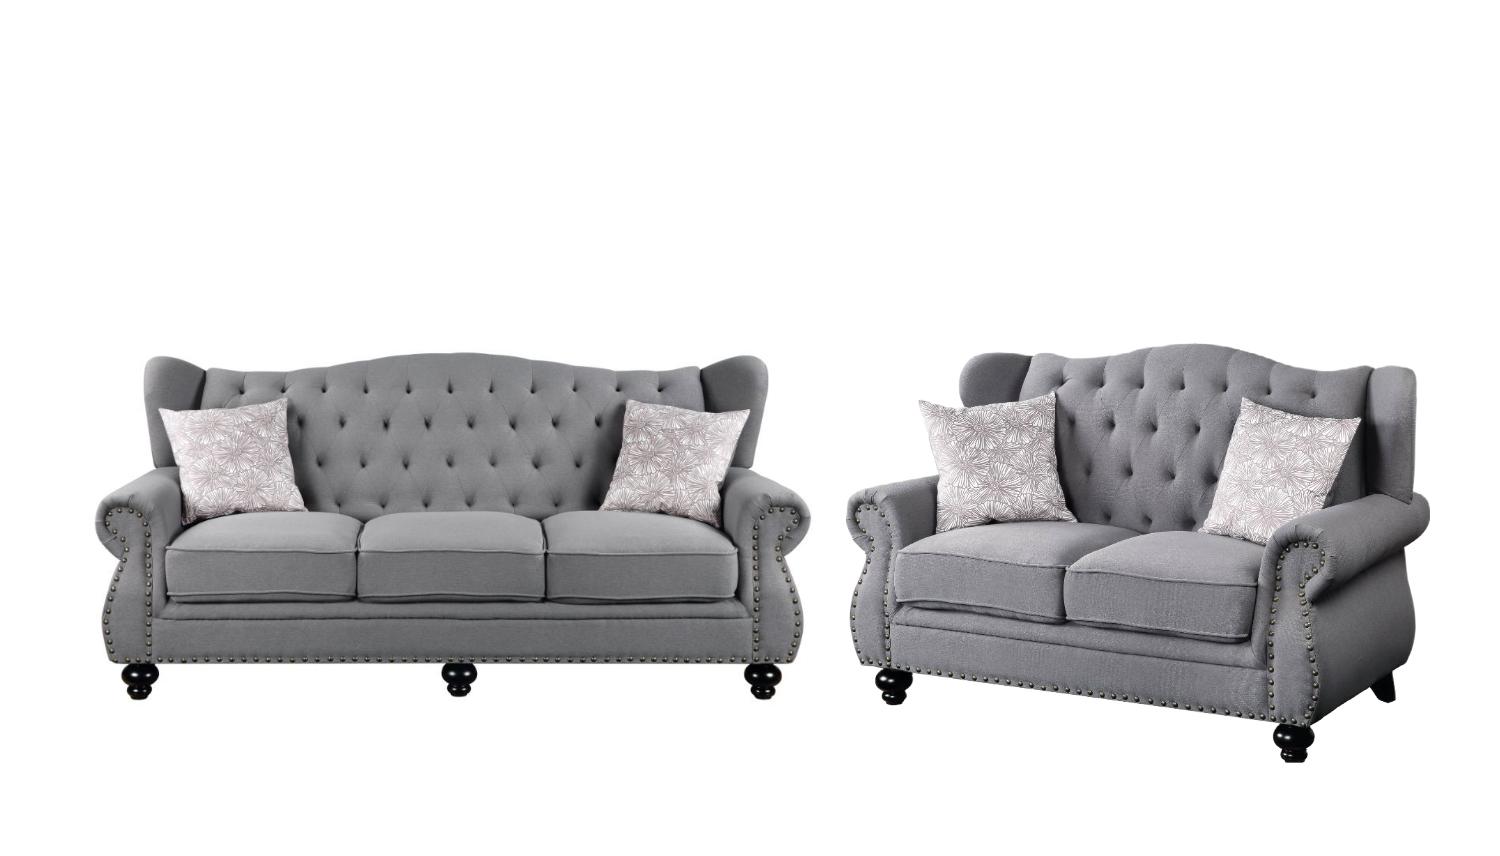 Traditional Sofa and Loveseat Set Hannes 53280-2pcs in Gray Fabric